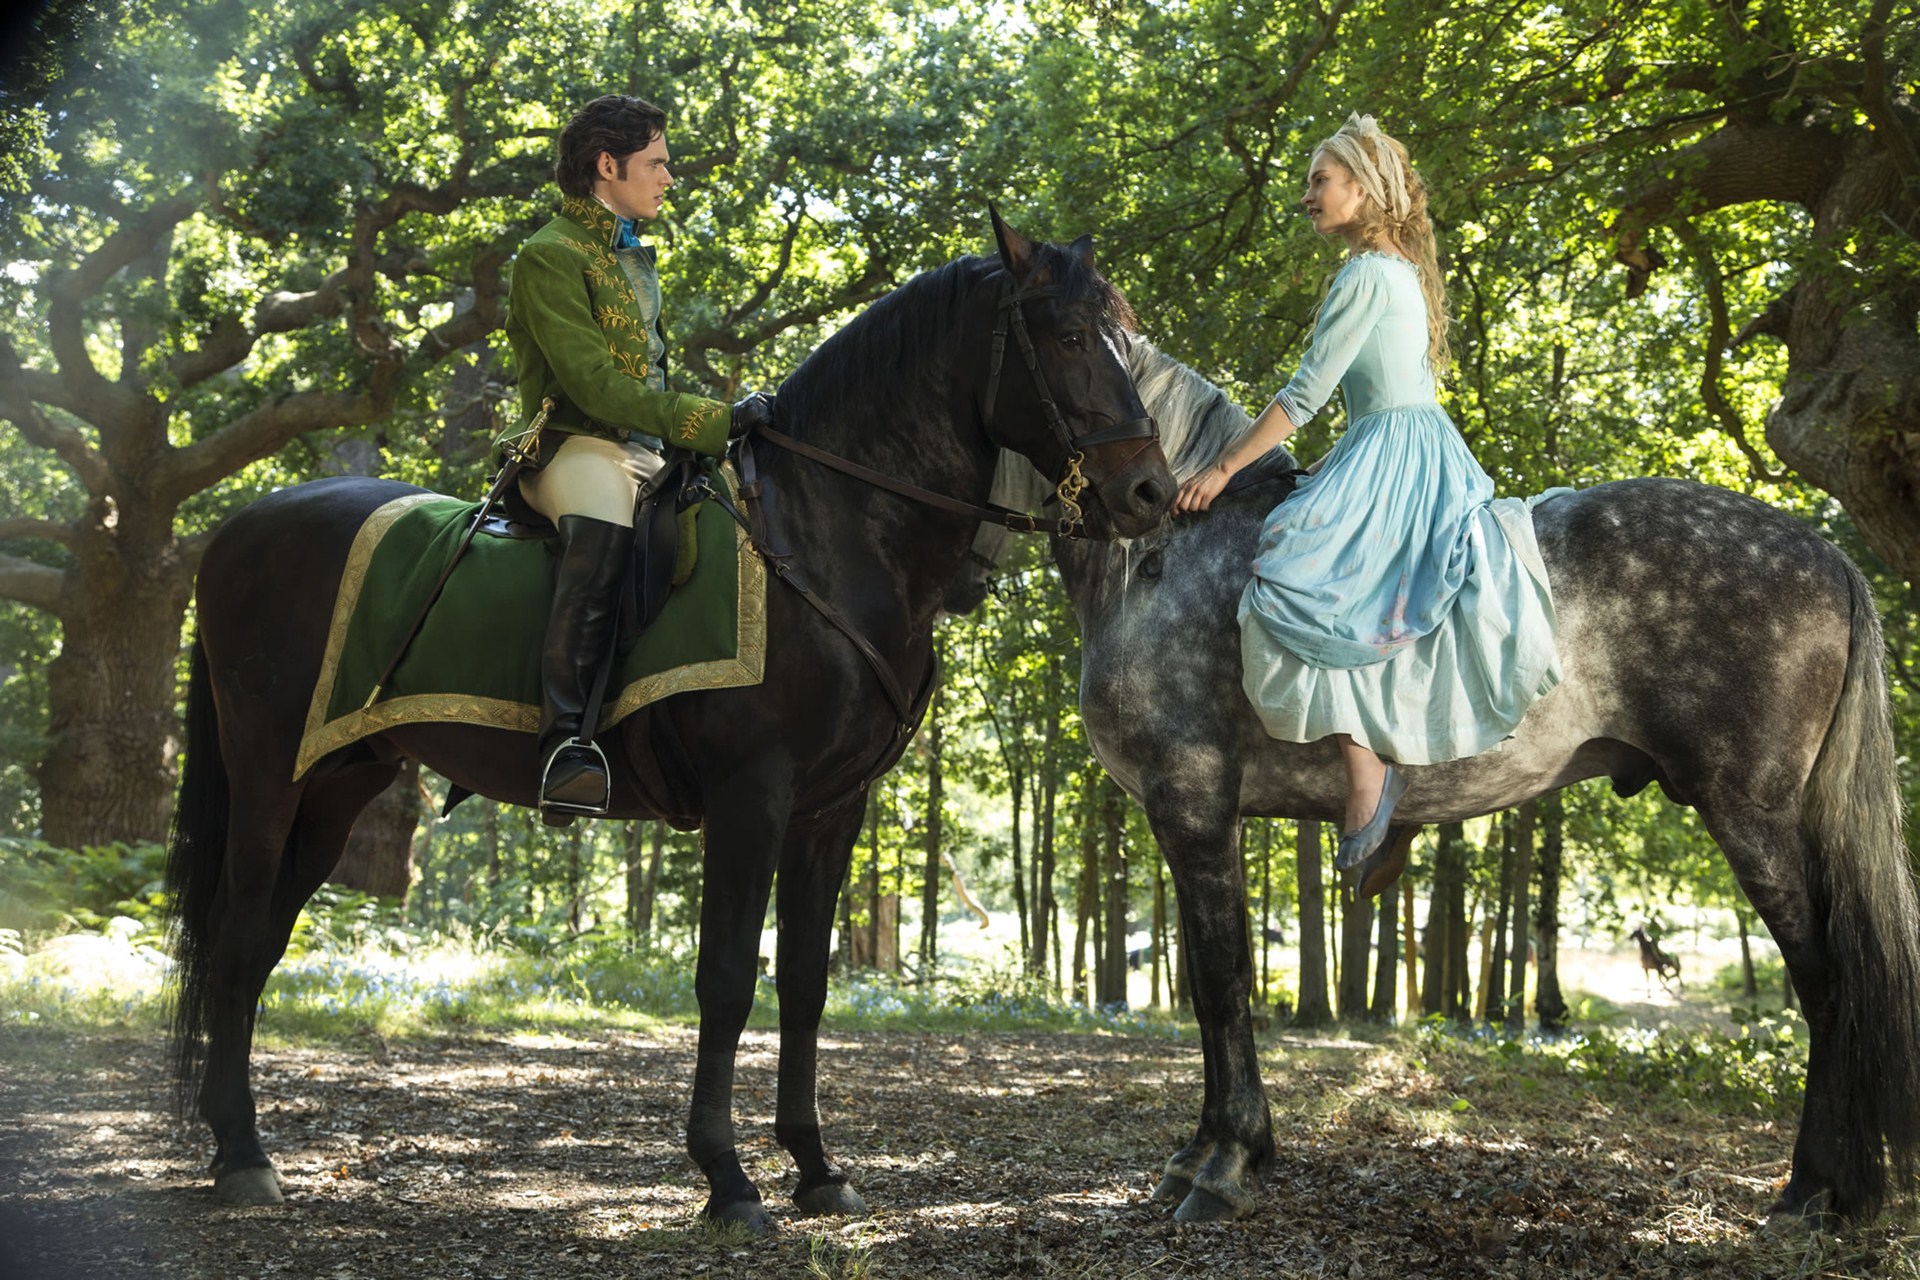 Cinderella 2015 Richard Madden And Lily James Wallpapers - Live Action Cinderella Horse - HD Wallpaper 